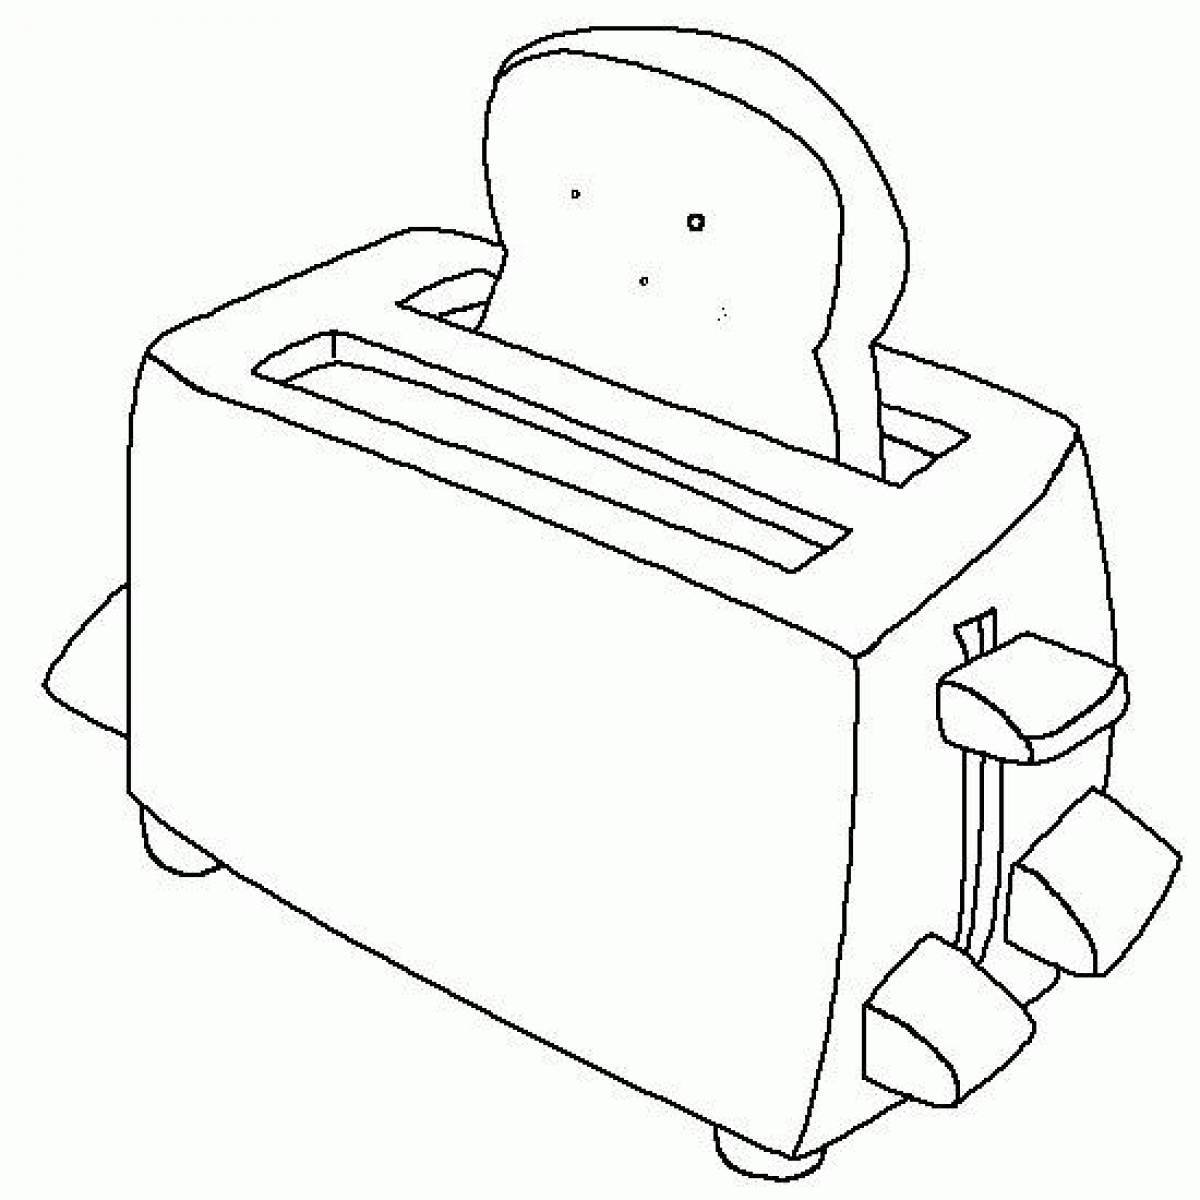 Exciting electrical appliance coloring pages